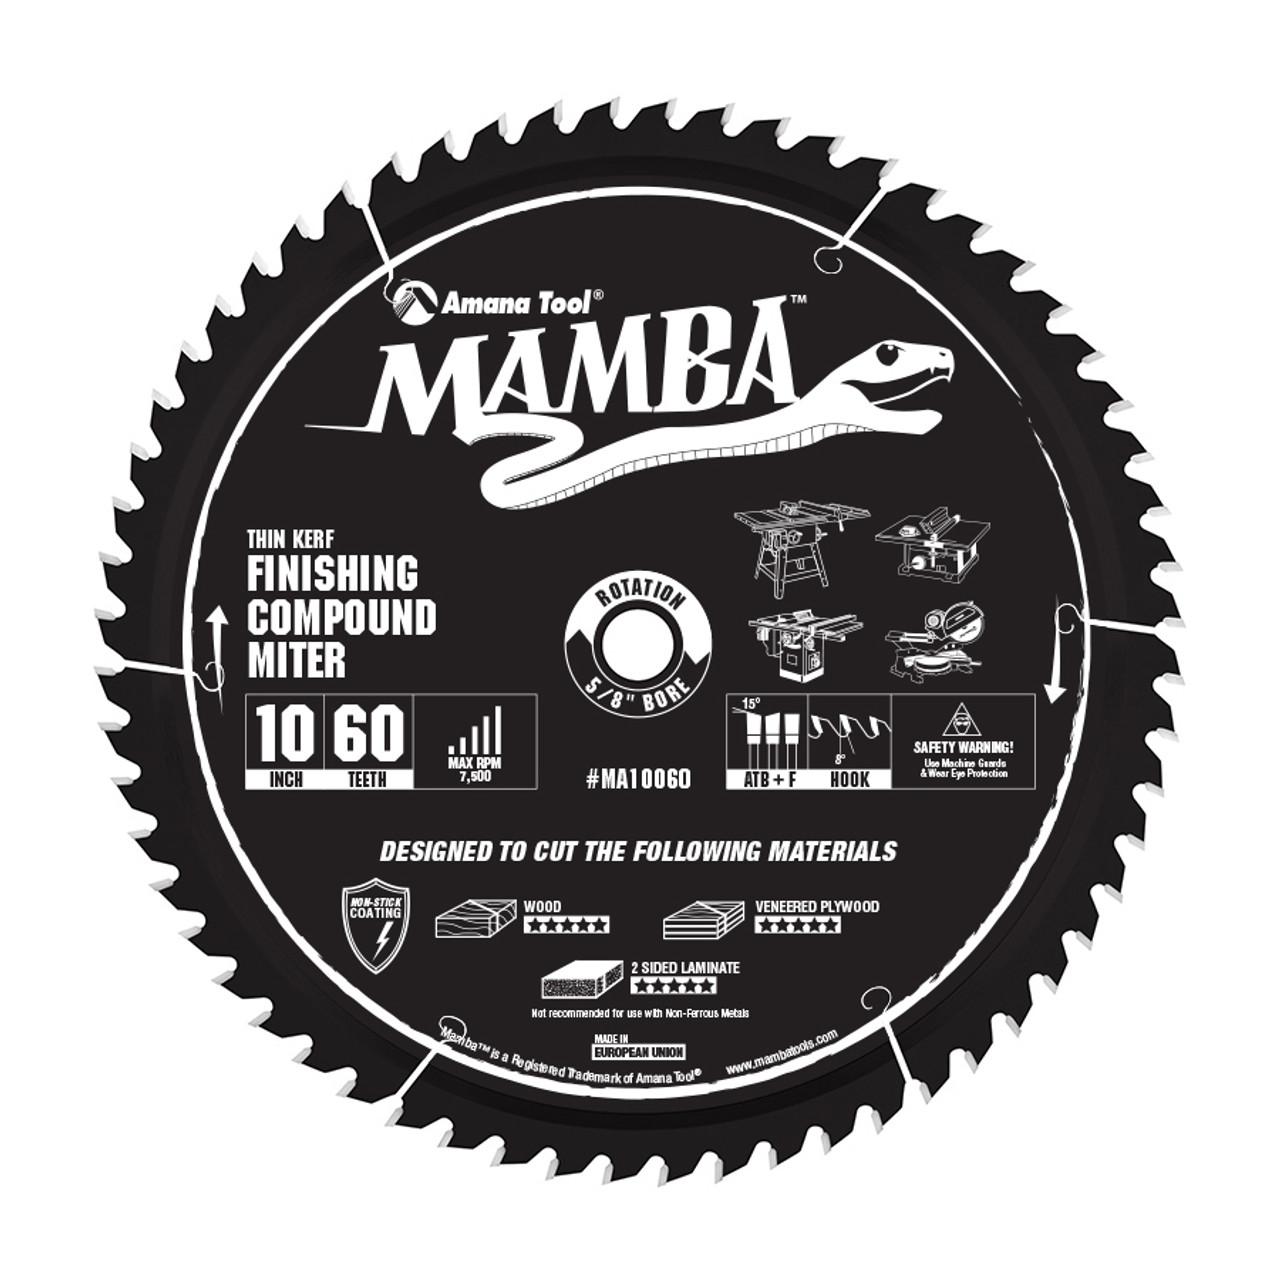 Amana Tool MA10060 Carbide Tipped Thin Kerf Finishing Compound Miter Mamba  Contractor Series 10 Inch D x 60T, ATB+F, Deg, 5/8 Bore Circular Saw Blade